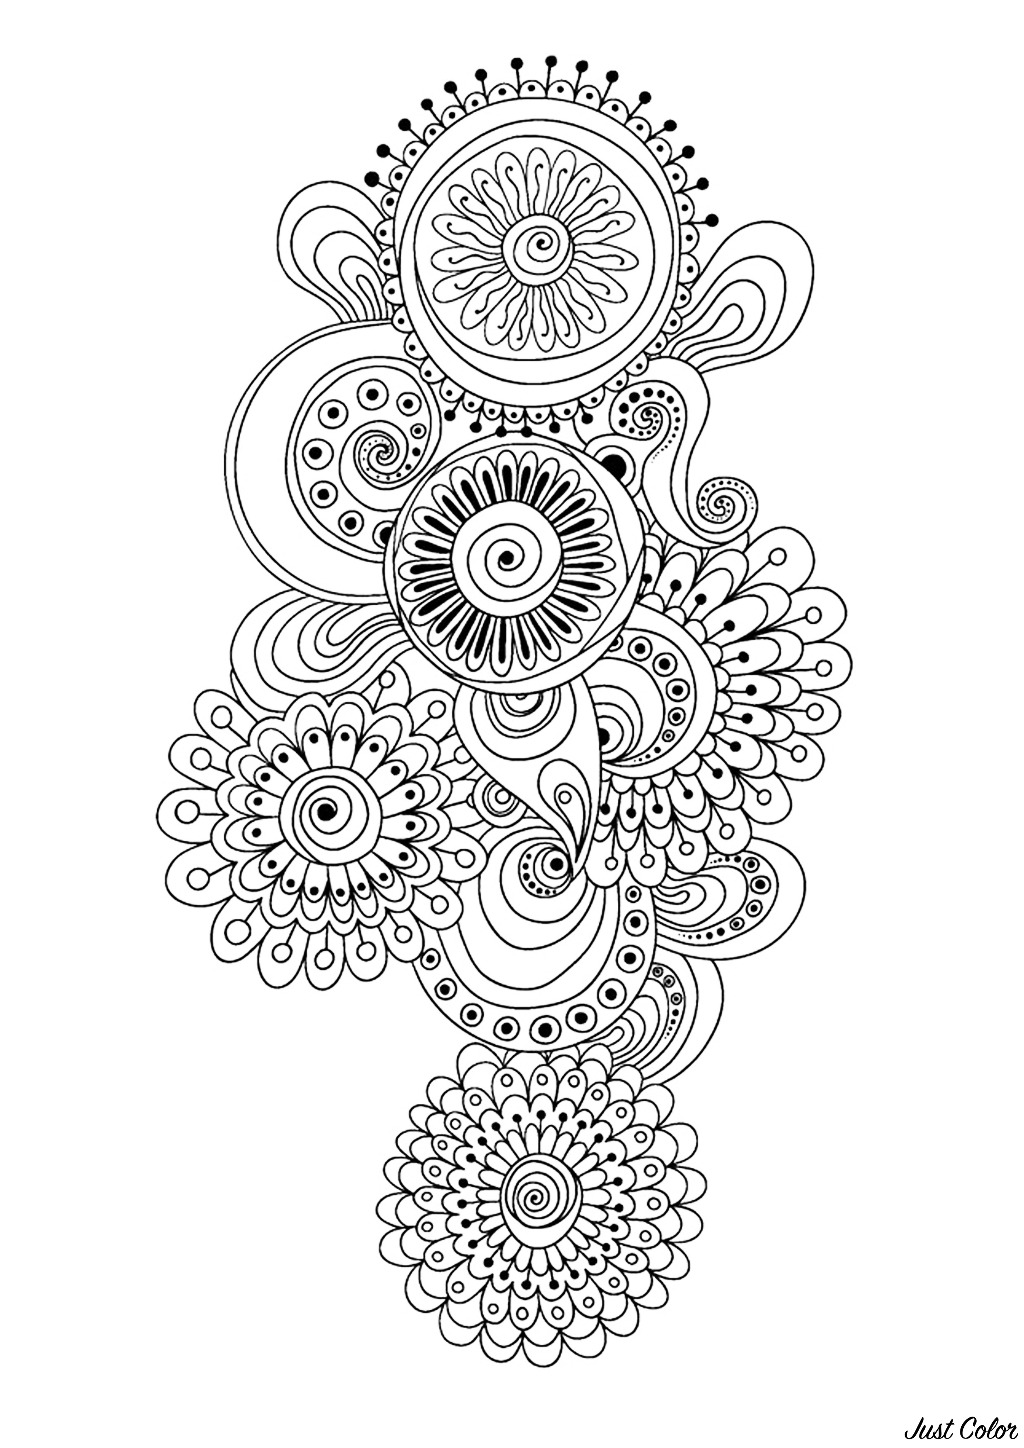 Download Zen antistress abstract pattern inspired - Anti stress Adult Coloring Pages